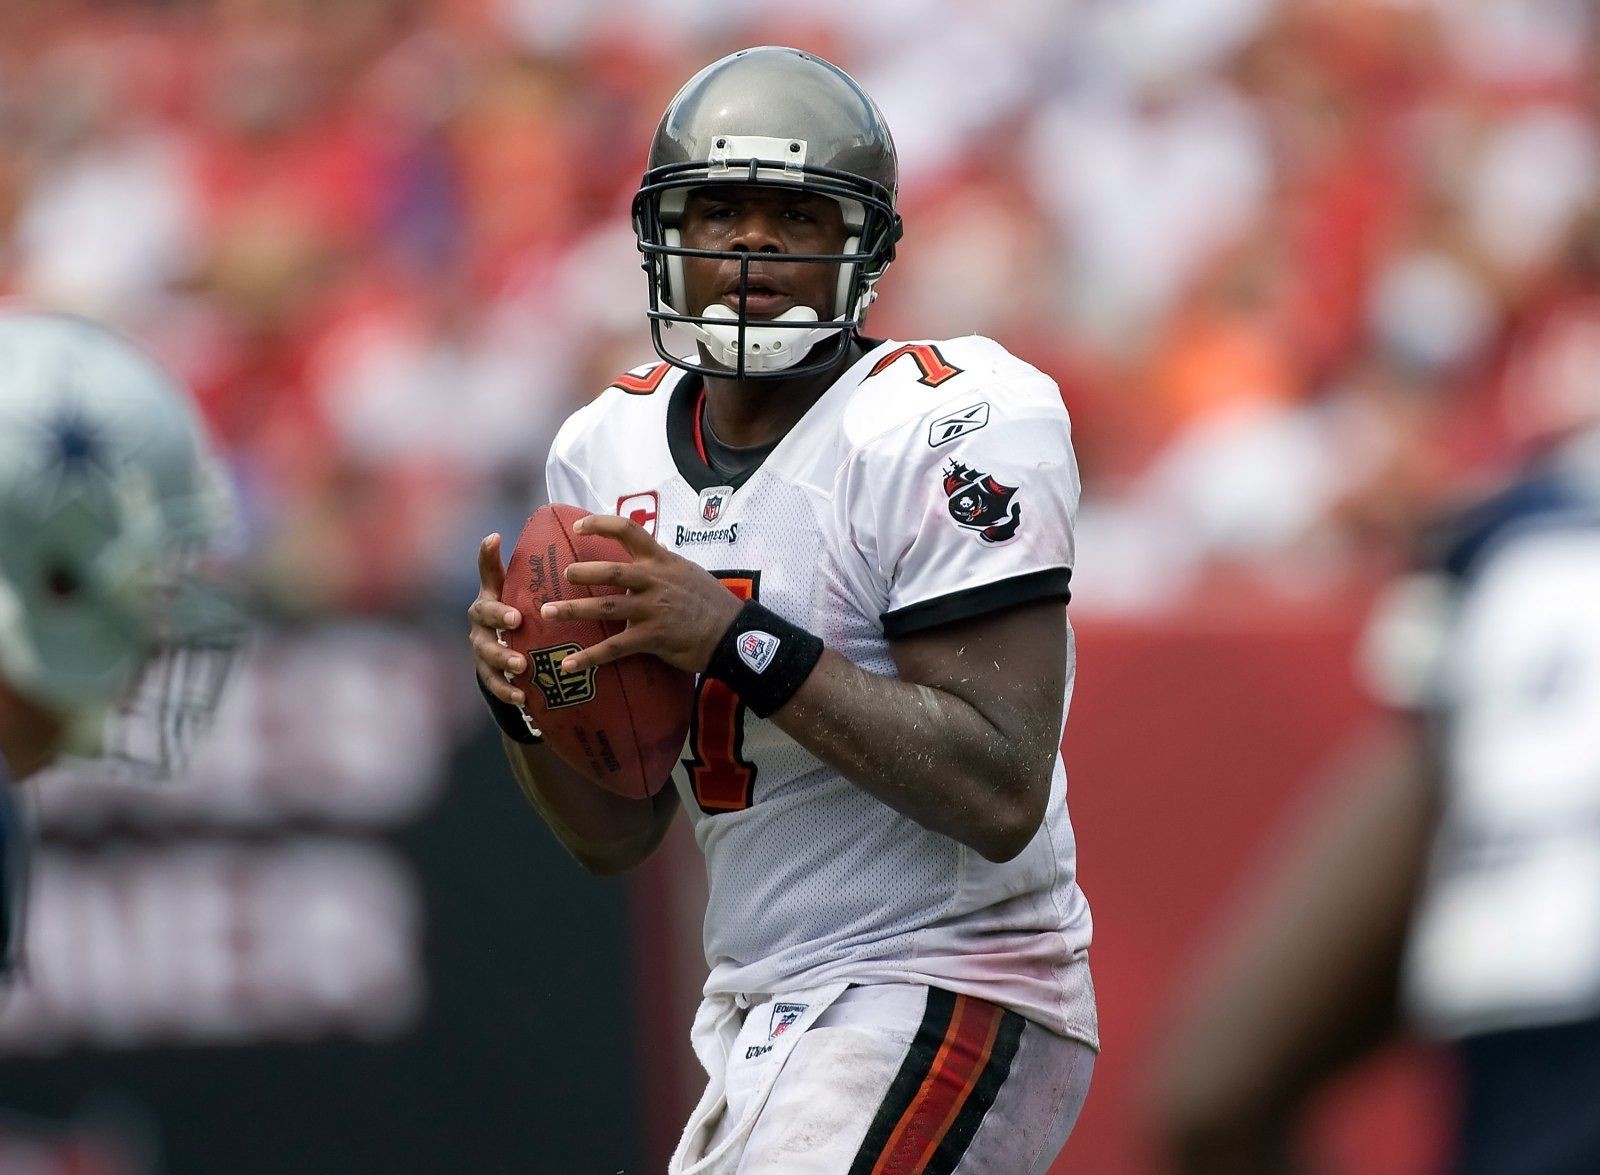 Tampa Bay Buccaneers: Offensive Coordinator Byron Leftwich is a “rising star”